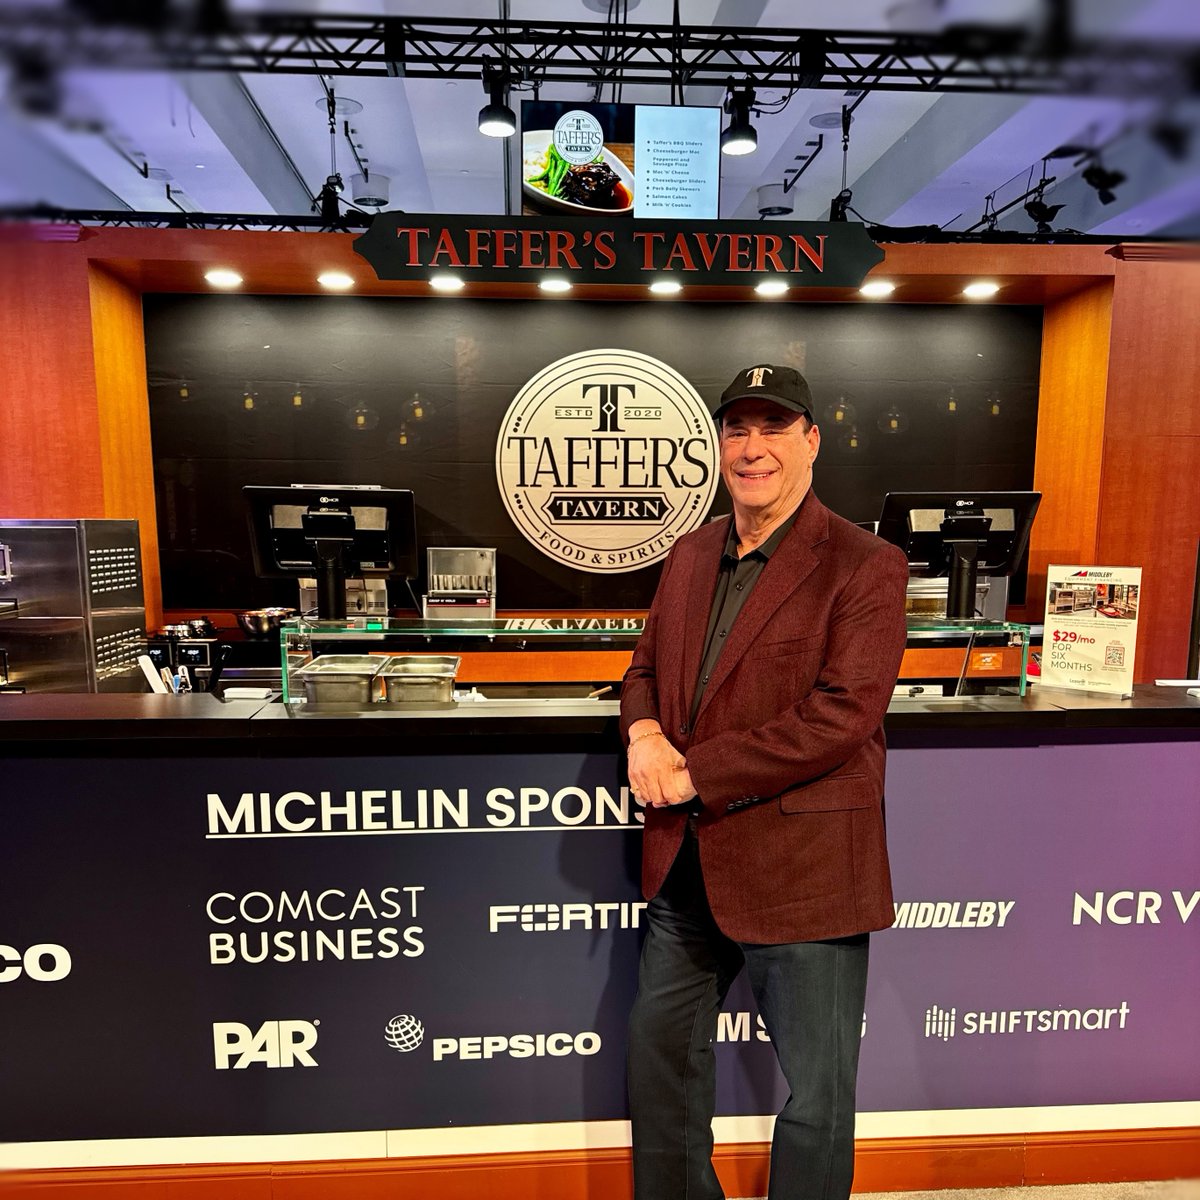 Did you visit the pop-up @tafferstavern by my #partners at @middlebycooking at @NRFBigShow? Taffer's Tavern's revolutionary hoodless/ventless concept works in traditional and non-traditional spaces giving franchisees a wide range of opportunities. #NRF2024